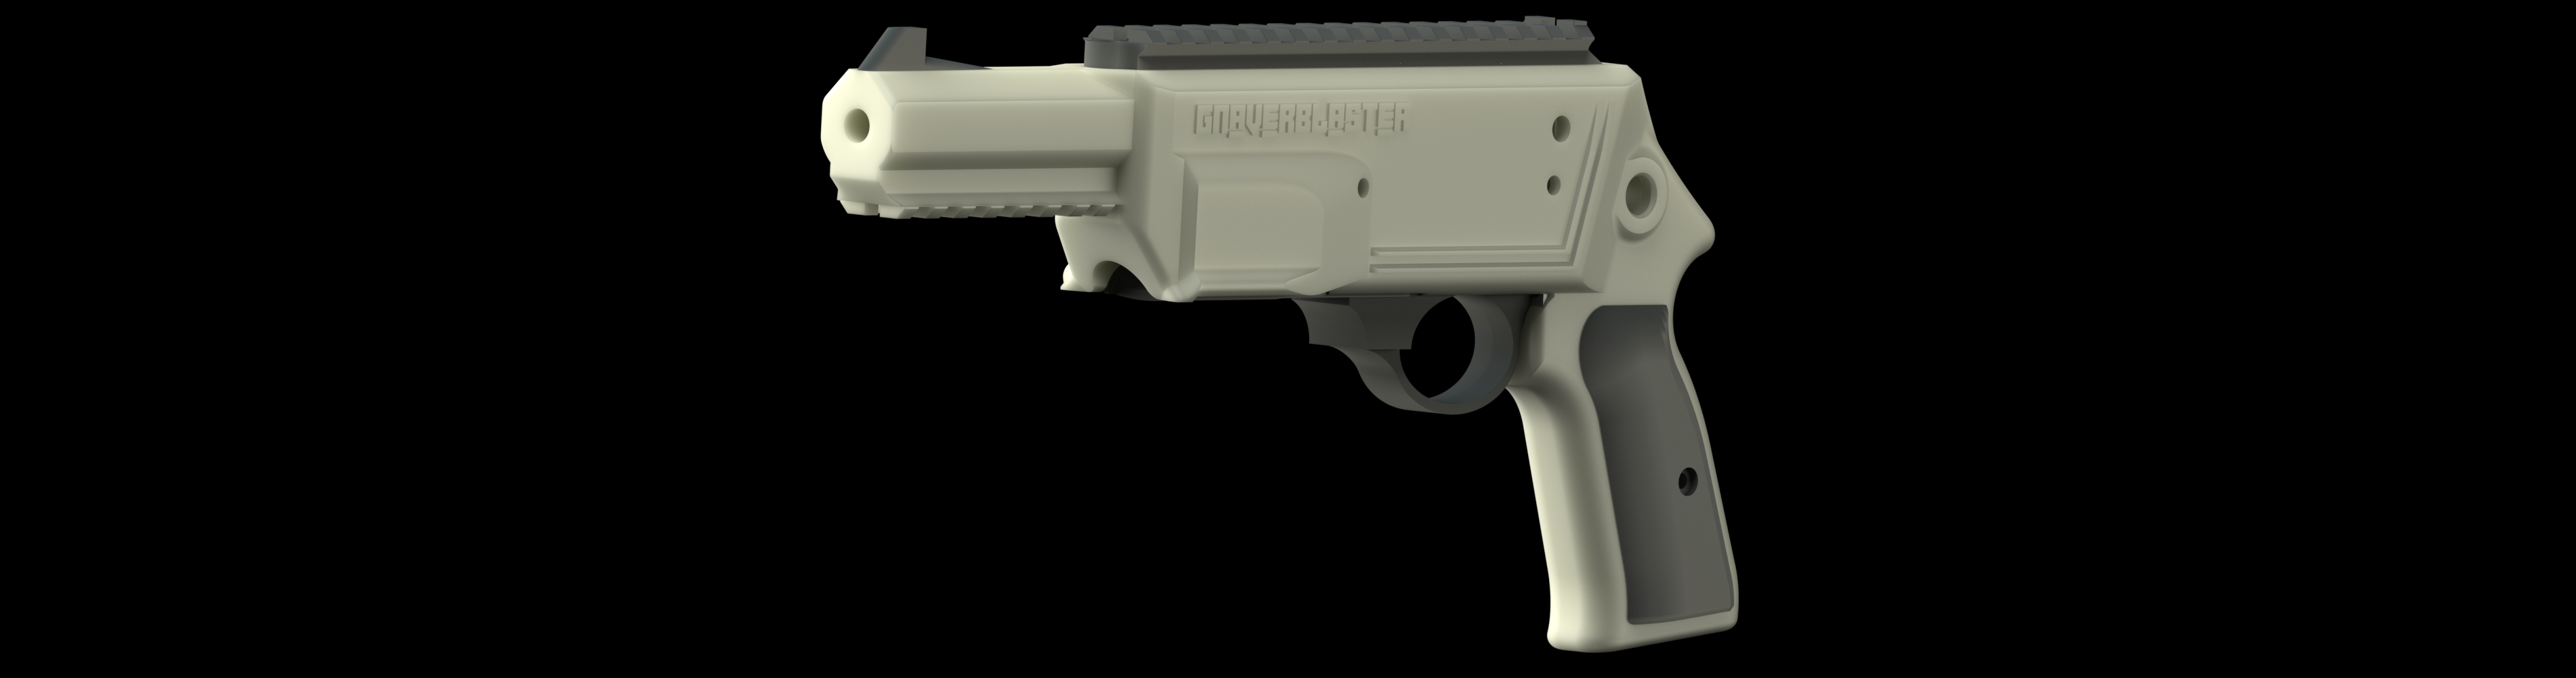 AWCY? Presents: The GnaverBlaster by DB Firearms - DEFCAD